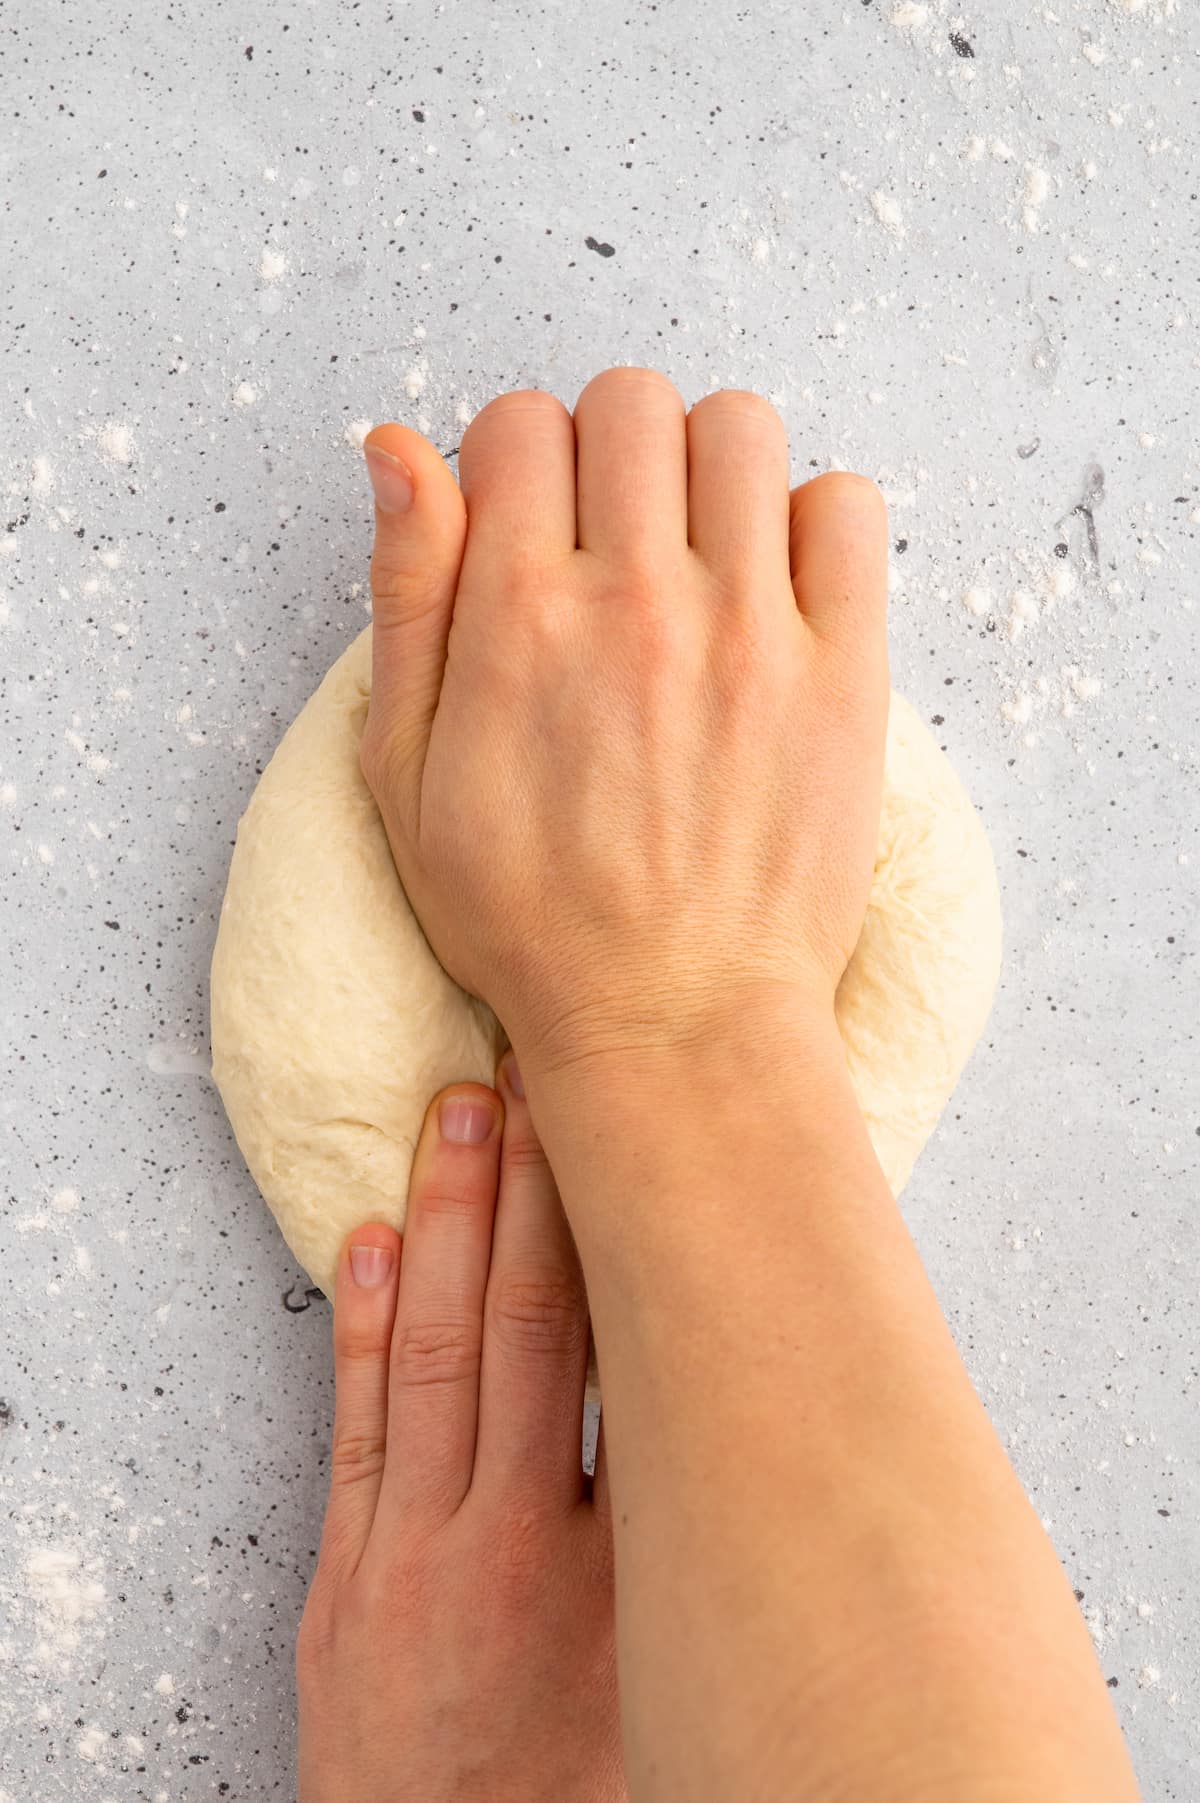 A pair of hands kneading the knish dough on a floured surface.